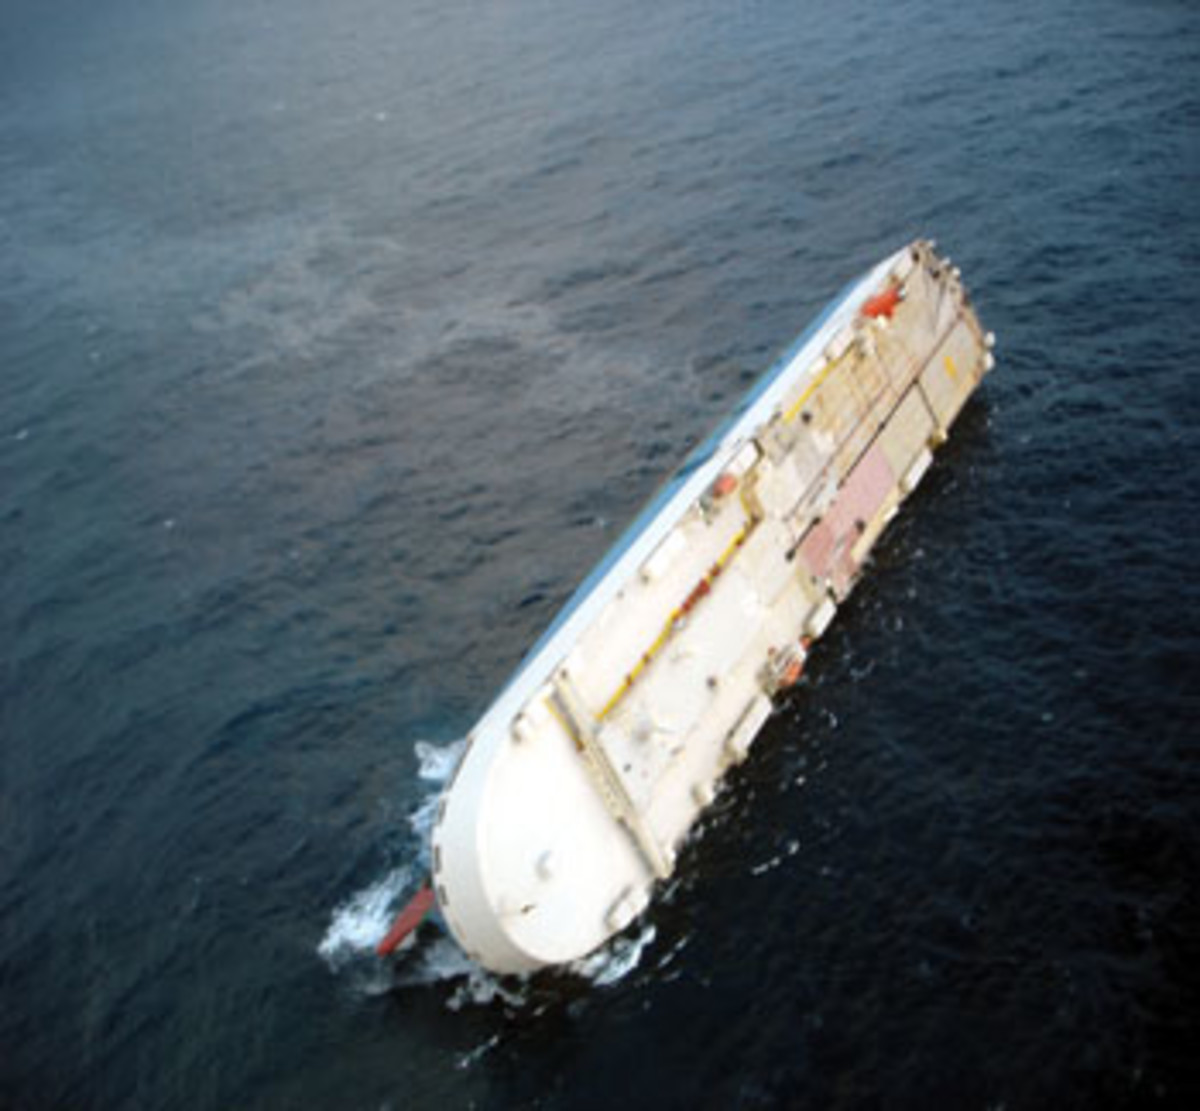 Free surface effect may have contributed to the Cougar Ace losing stability during a botched ballast exchange in 10-foot seas.